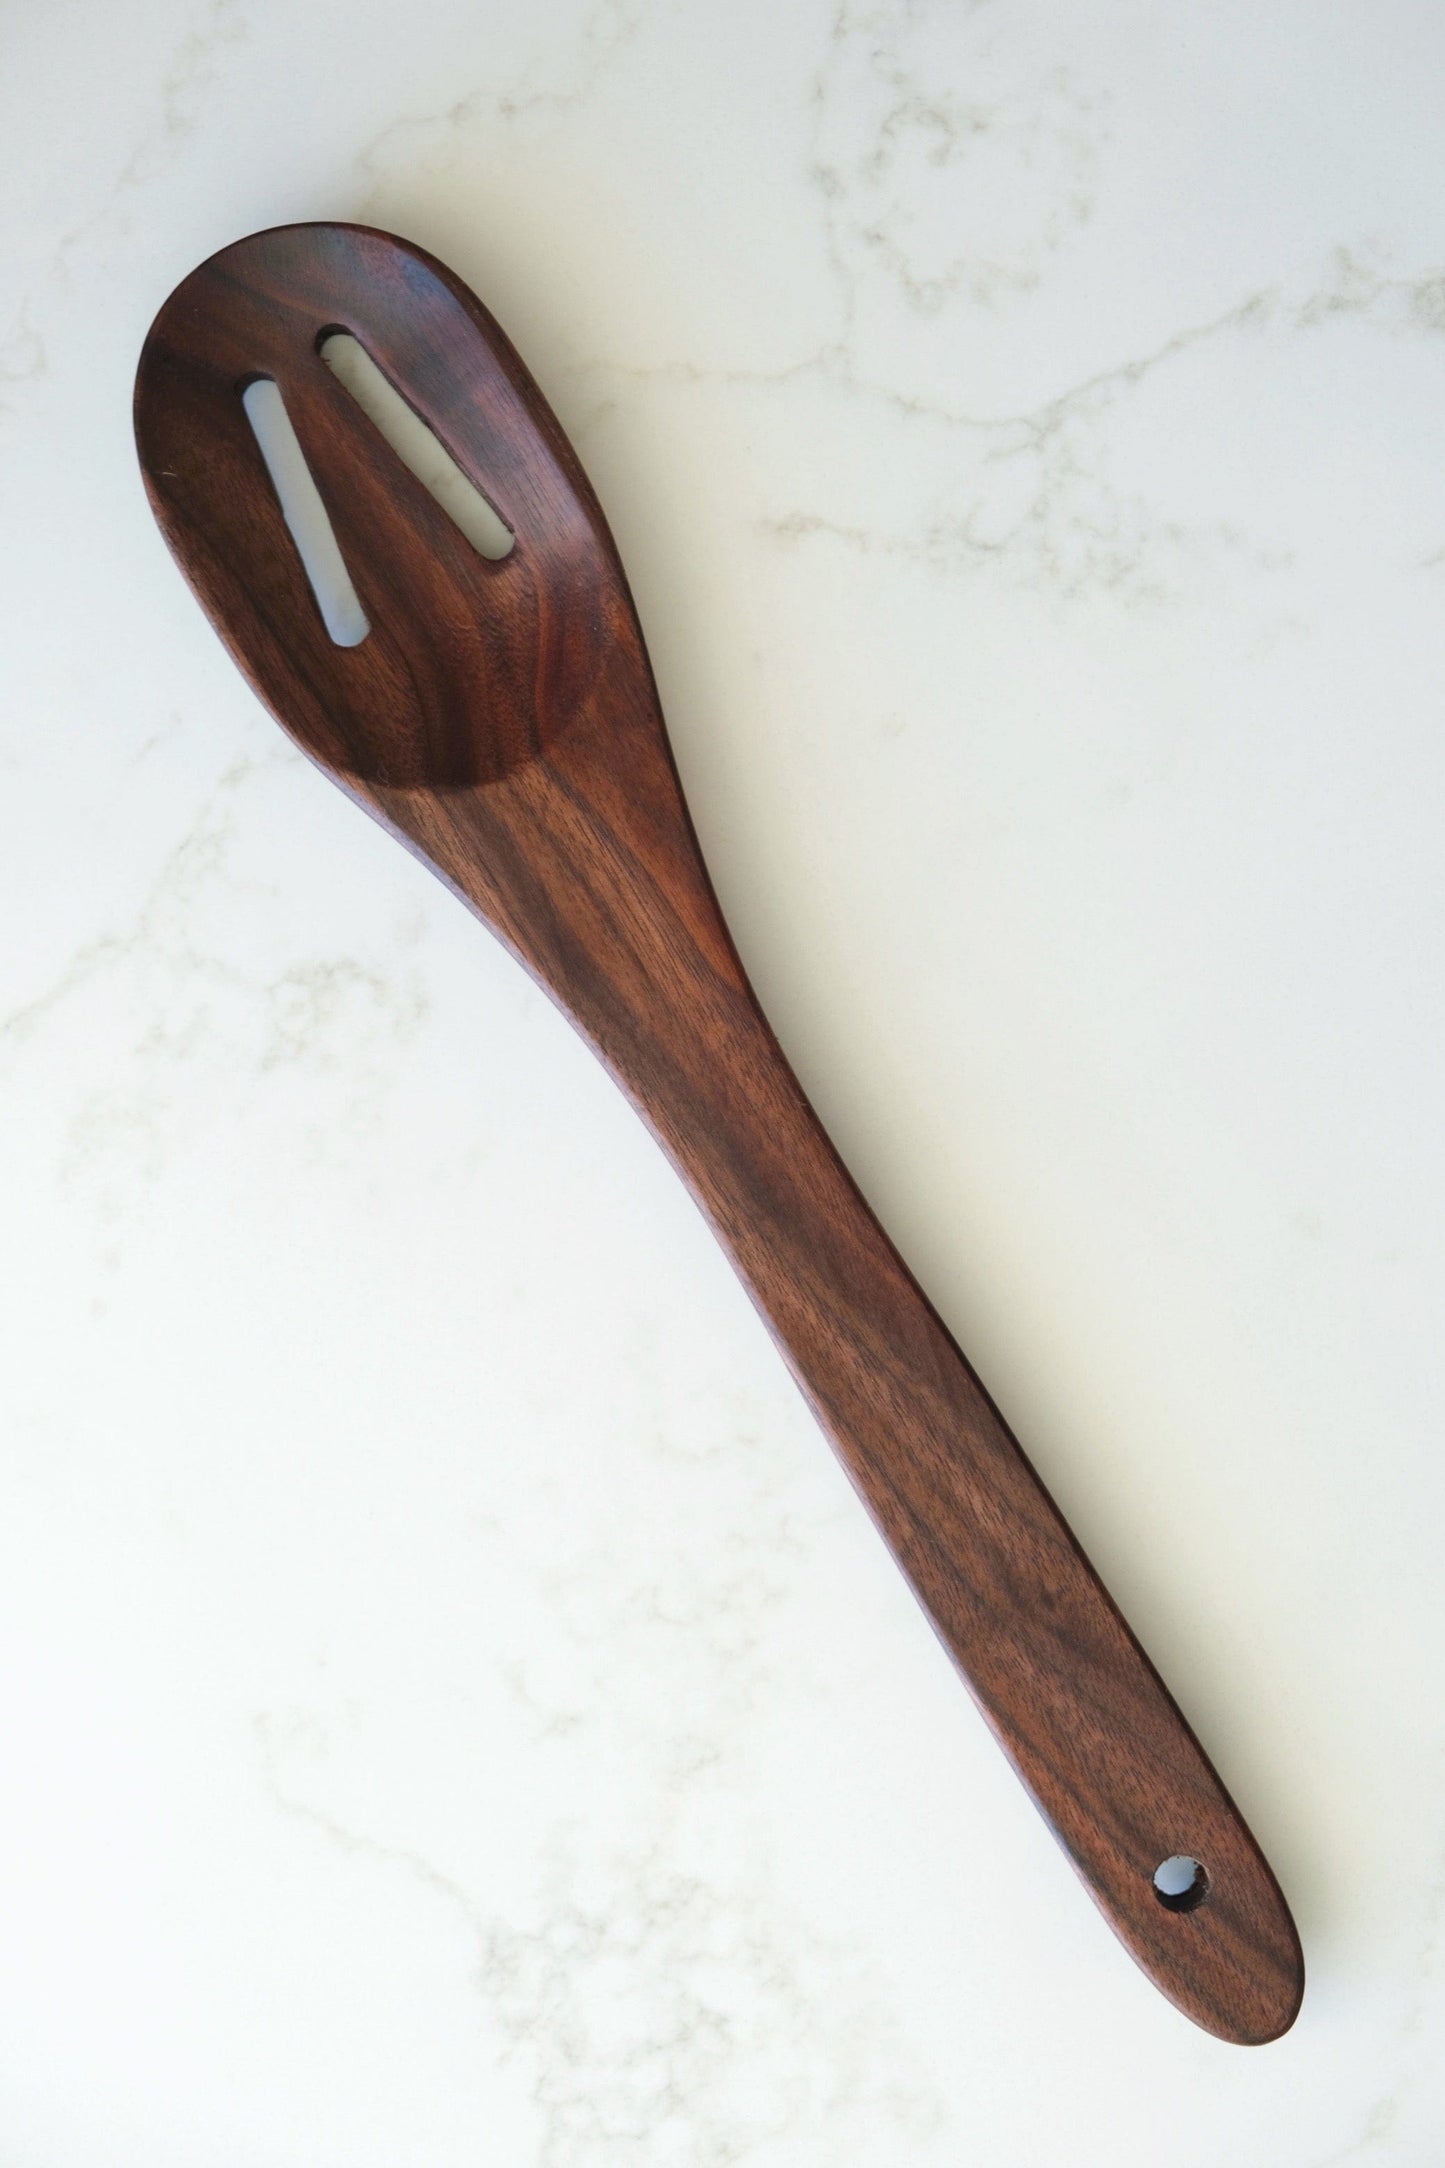 Classic French Cooking Spoon: Slotted